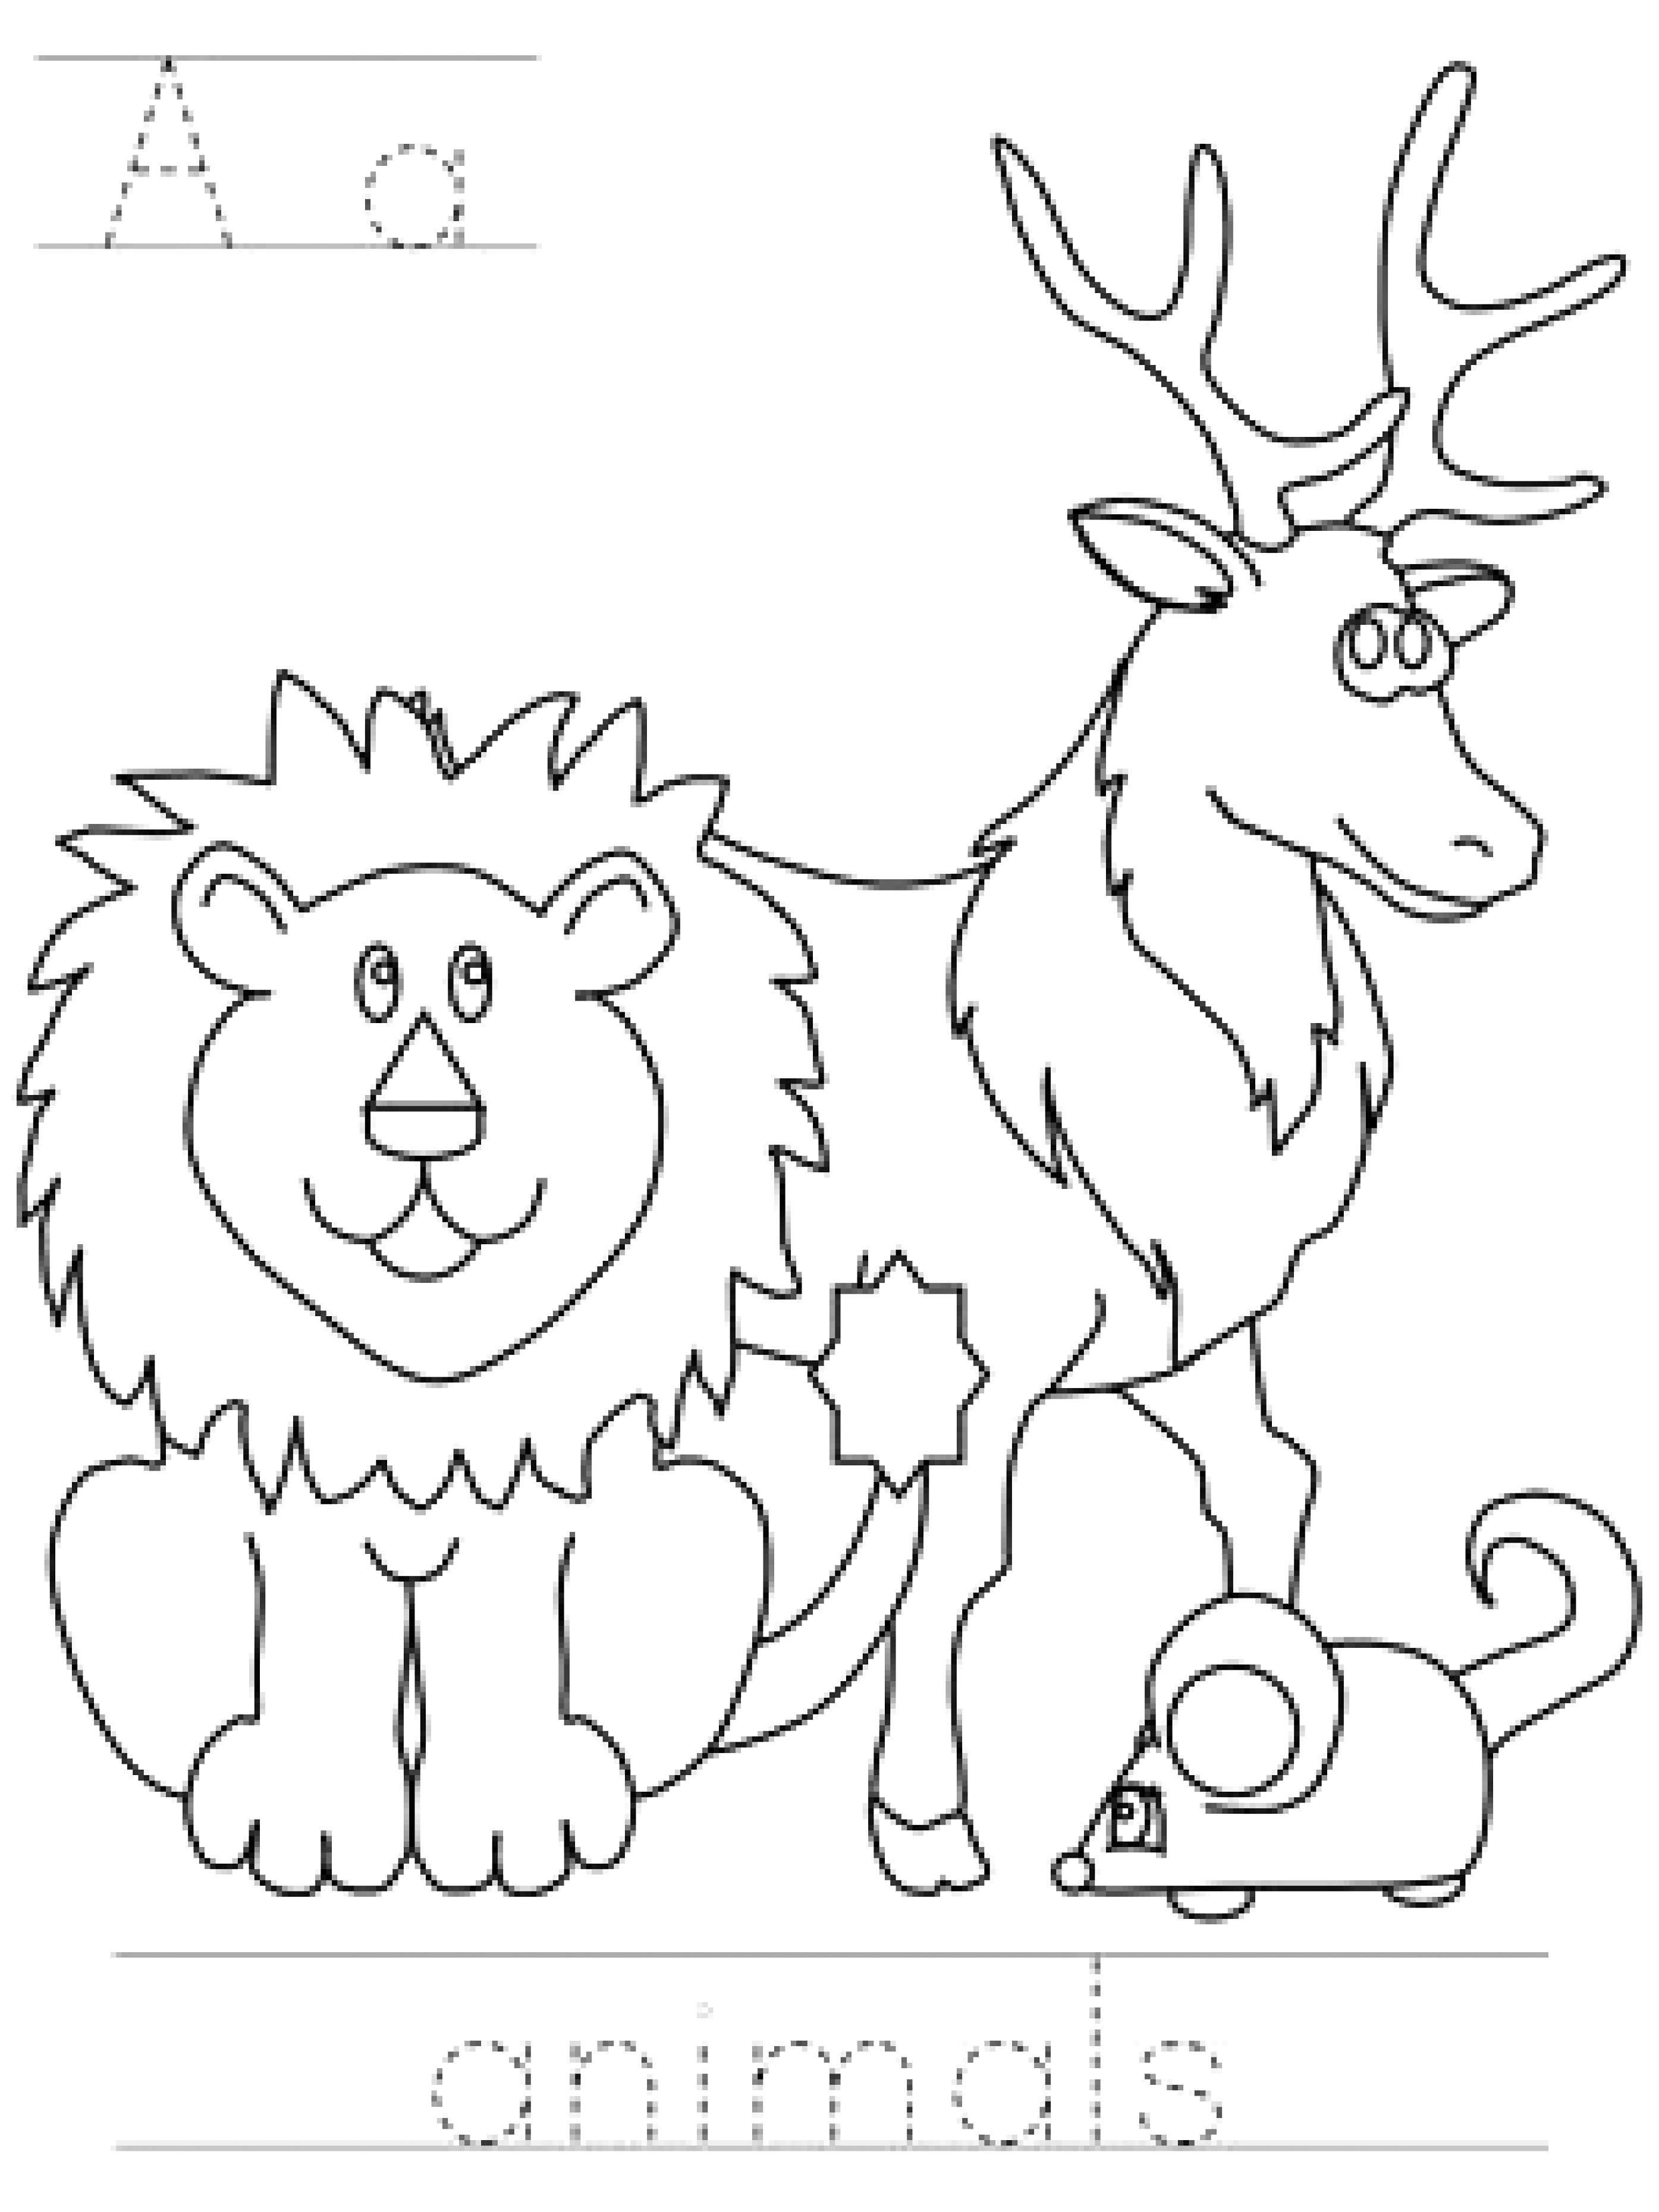 Dltk Coloring Pages
 Dltk Coloring Pages to Print Free Coloring Books